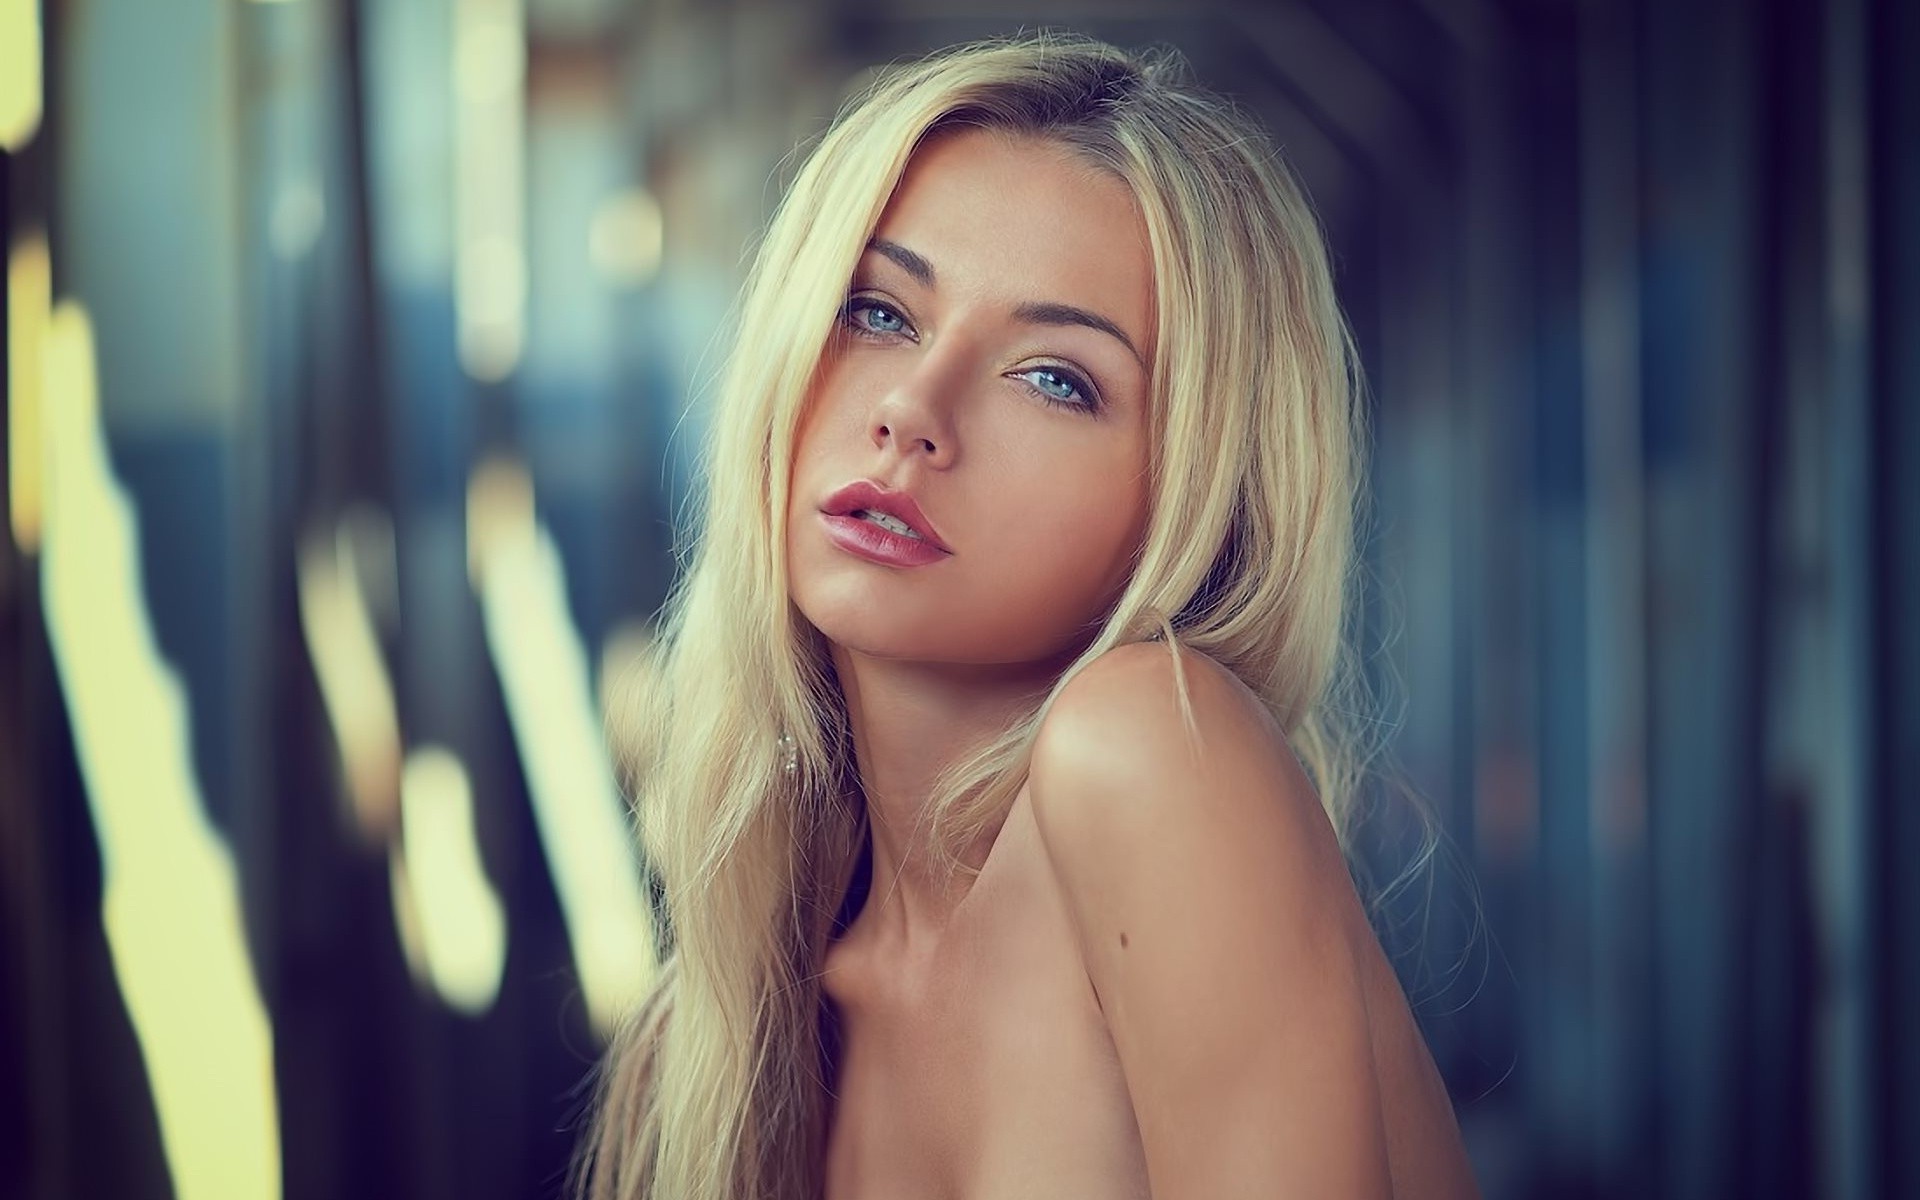 Blue eyes and blonde hair: A classic combination - wide 7